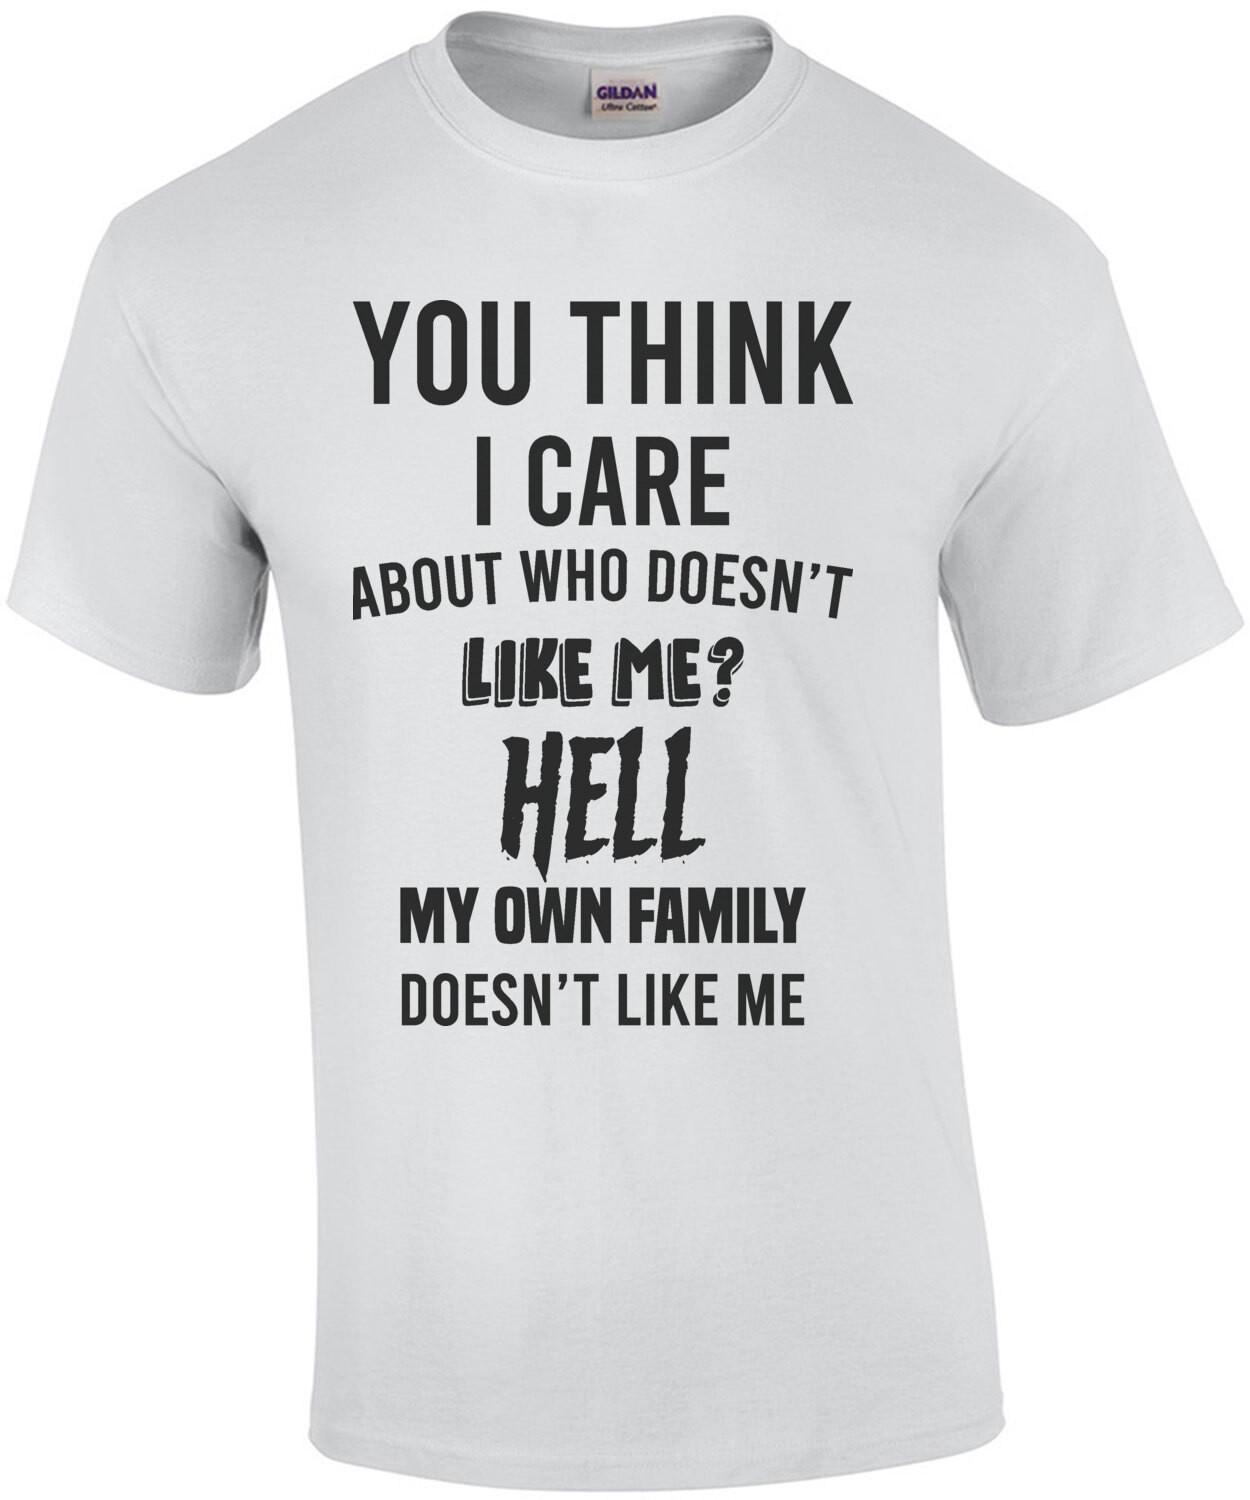 You think I care about who doesn't like me? Hell my own family doesn't like me - sarcastic t-shirt